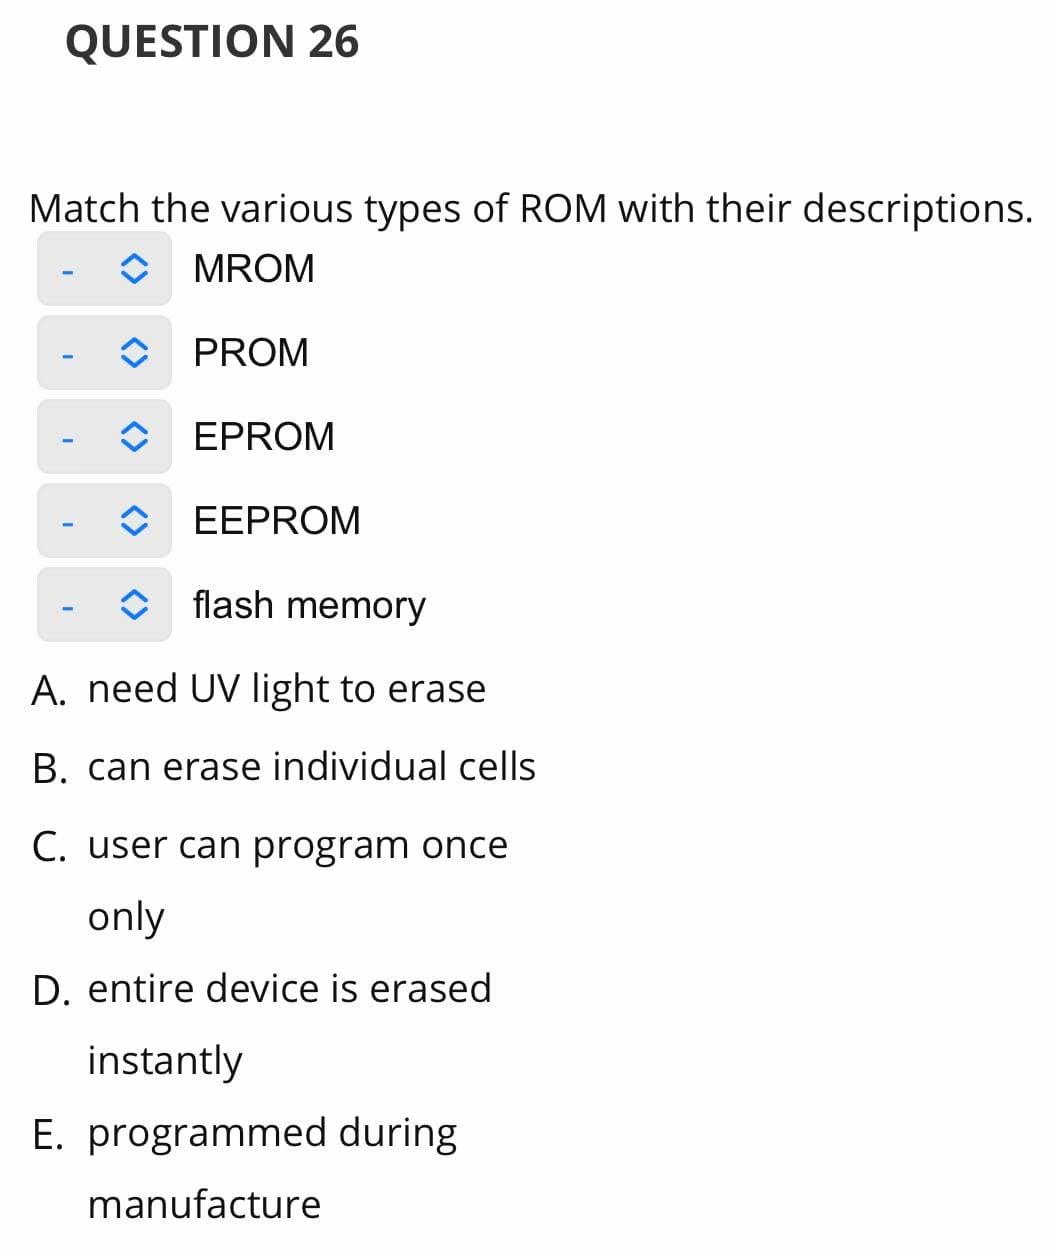 QUESTION 26
Match the various types of ROM with their descriptions.
MROM
PROM
EPROM
EEPROM
flash memory
A. need UV light to erase
B. can erase individual cells
C. user can program once
only
D. entire device is erased
instantly
E. programmed during
manufacture
